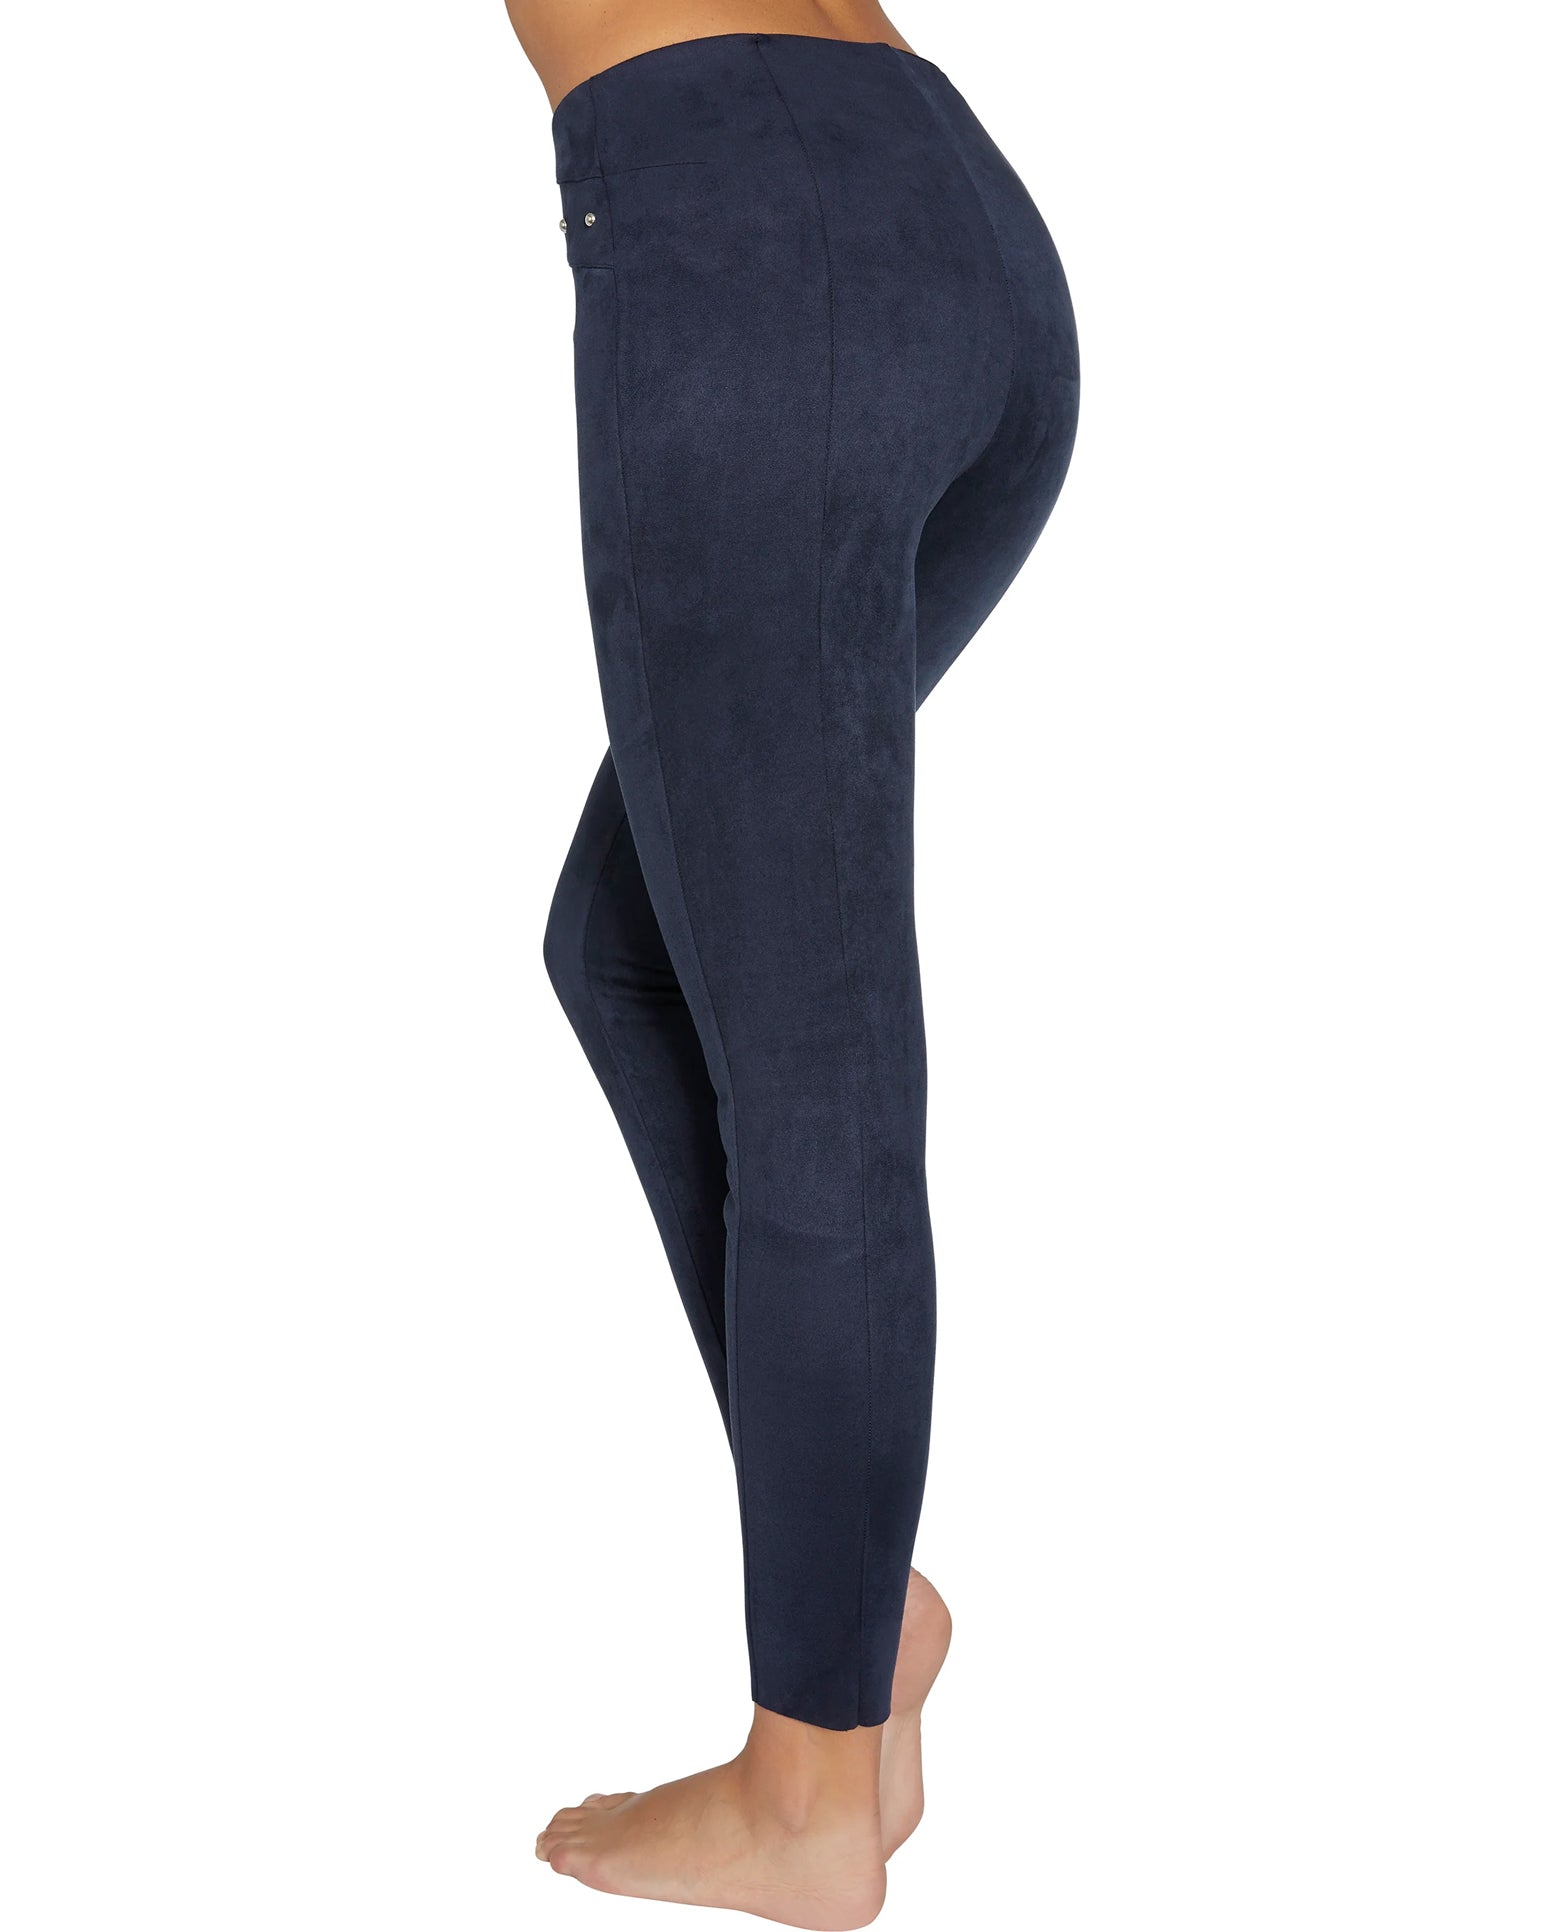 Ysabel Mora 70258 Suede Effect Treggings - navy blue high waist trouser leggings in faux suede with silver studs, back view.